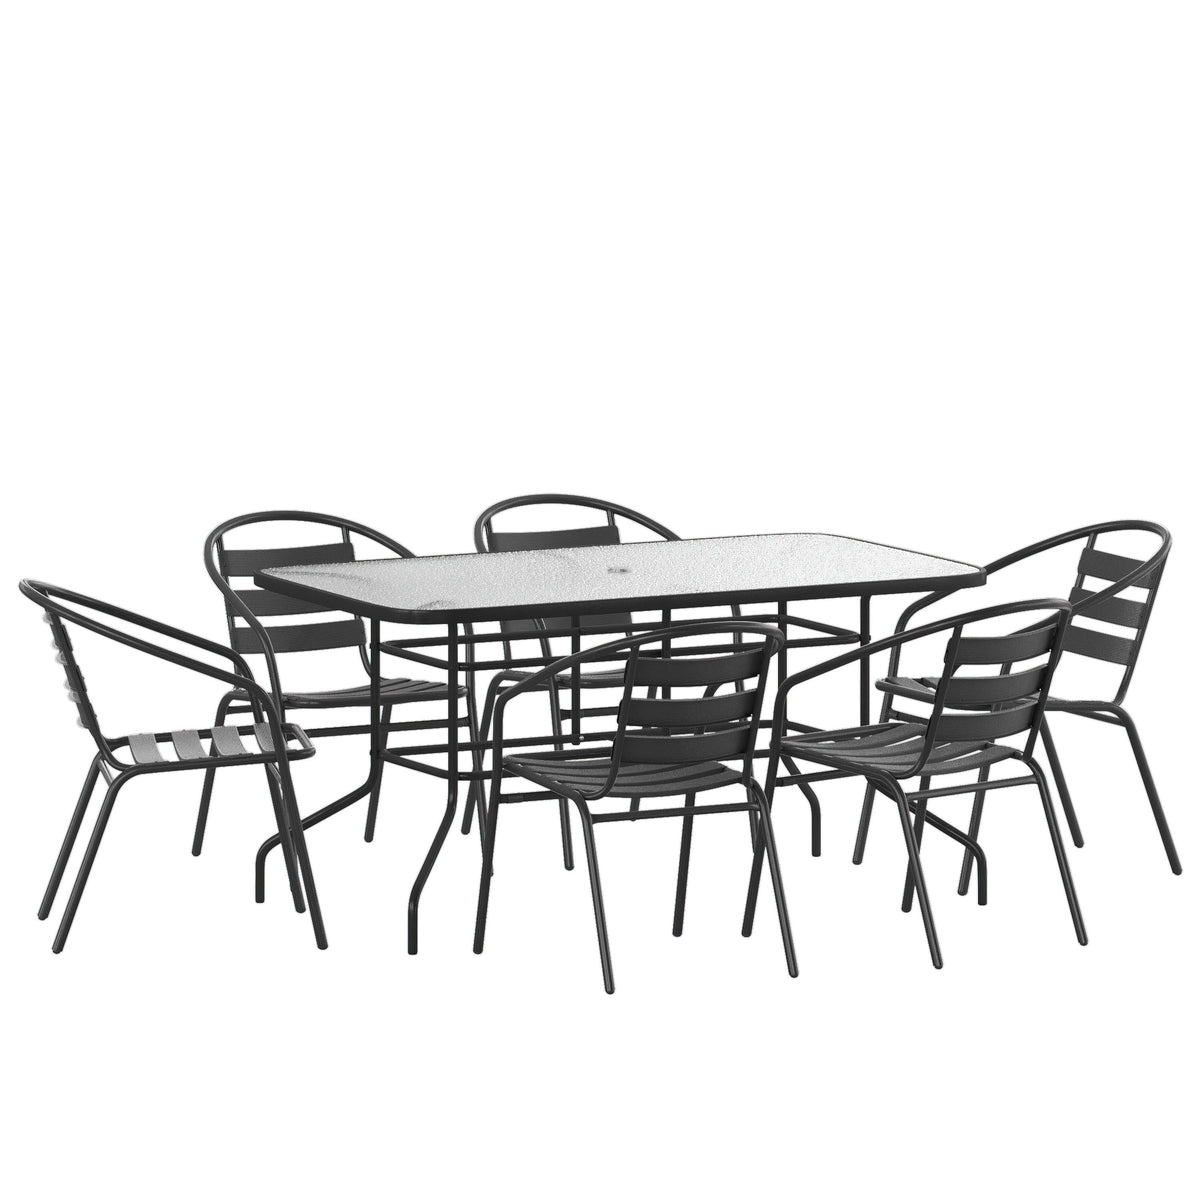 7 Piece Patio Dining Set - 55inch Glass Patio Table, 6 Black Aluminum Stack Chairs